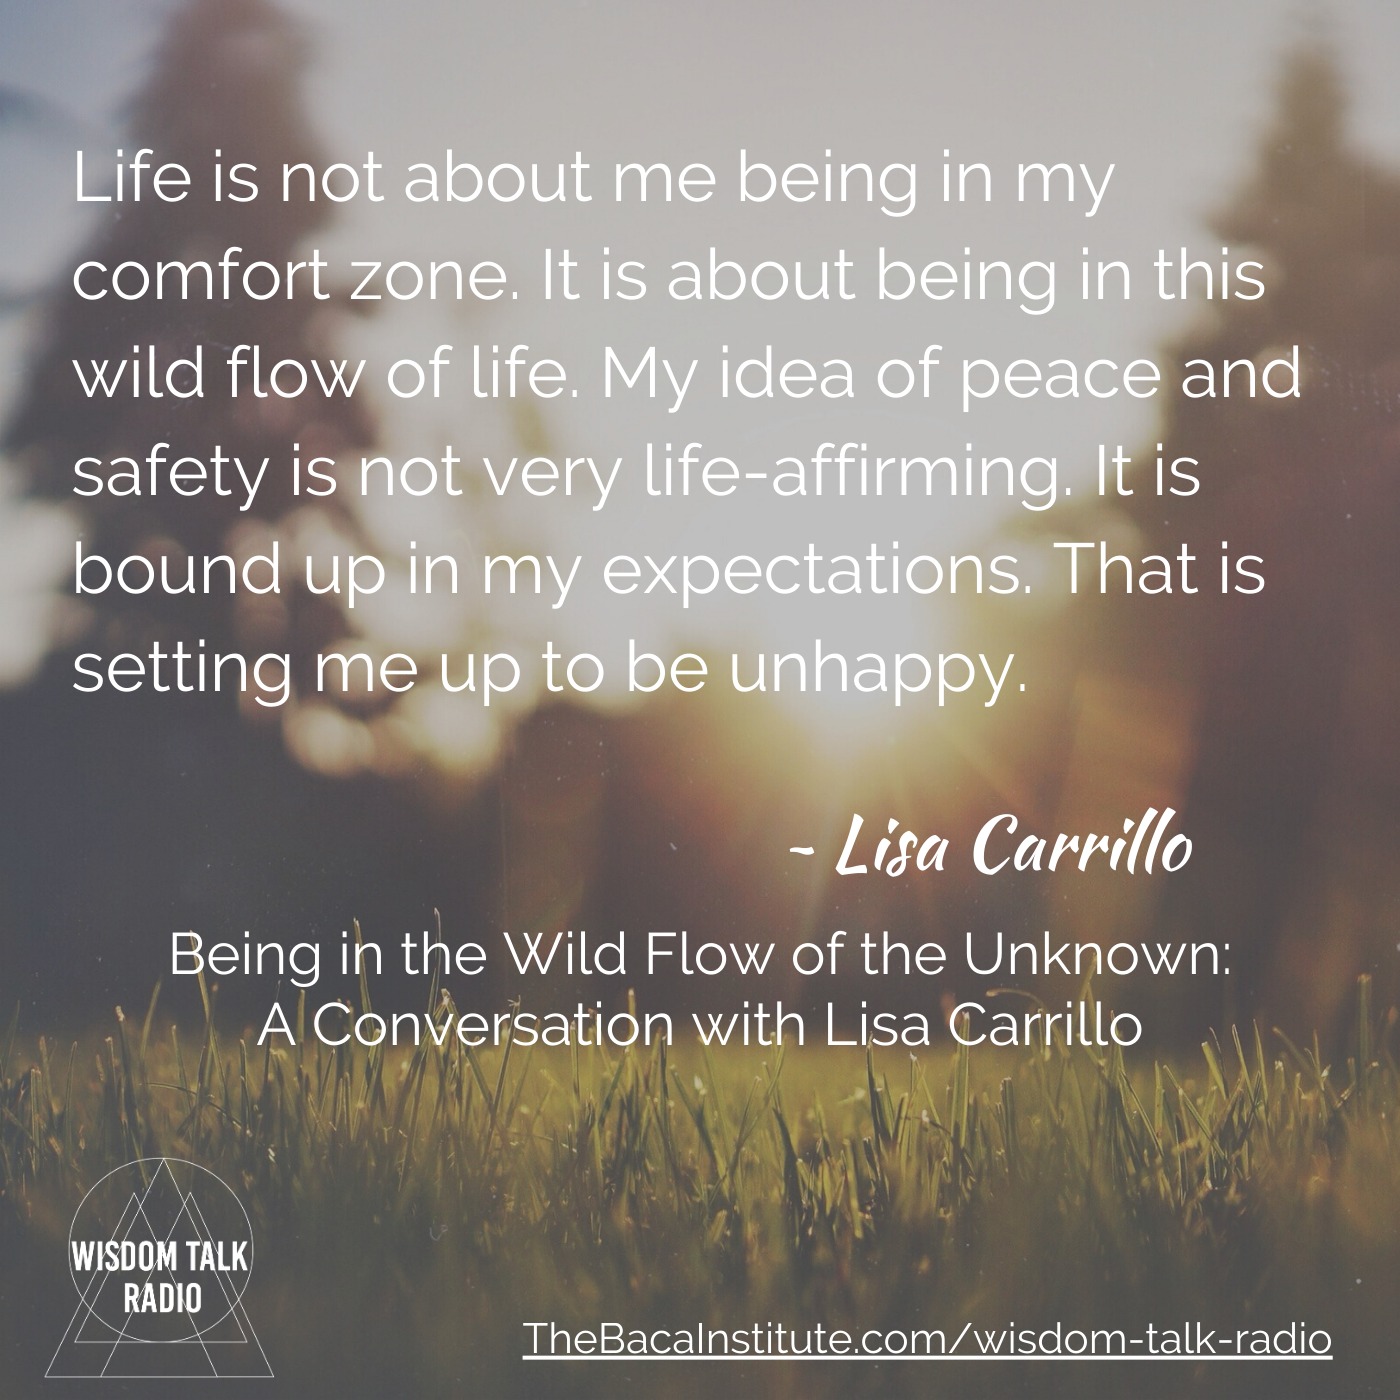 Bring in the Wild Flow of the Unknown: a Conversation with Lisa Carrillo